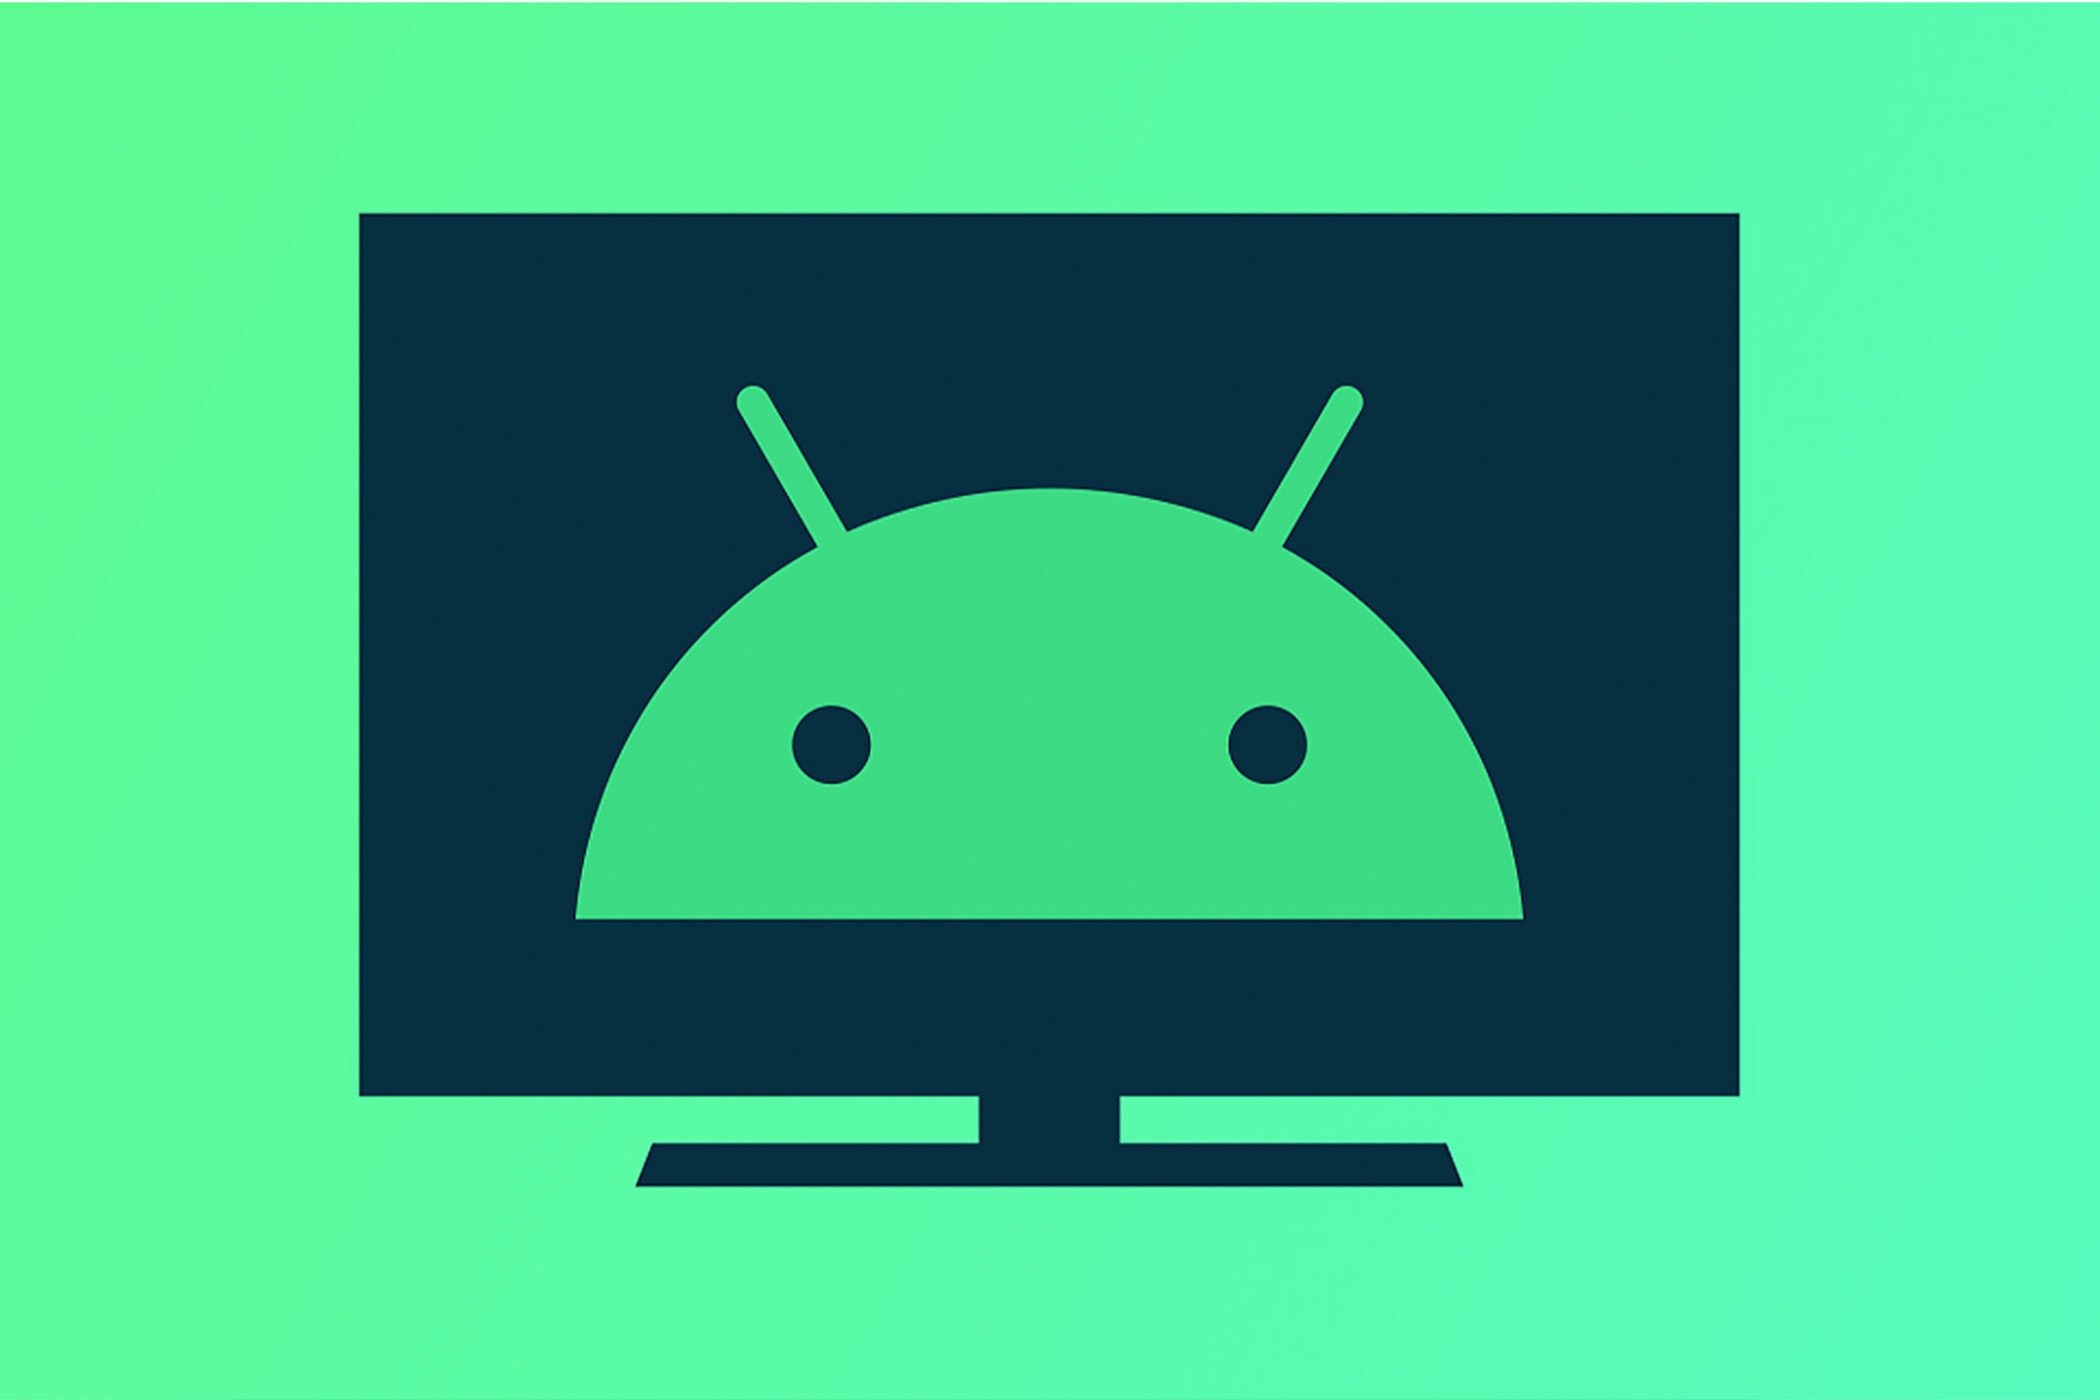 The Android logo on an illustration of a TV.